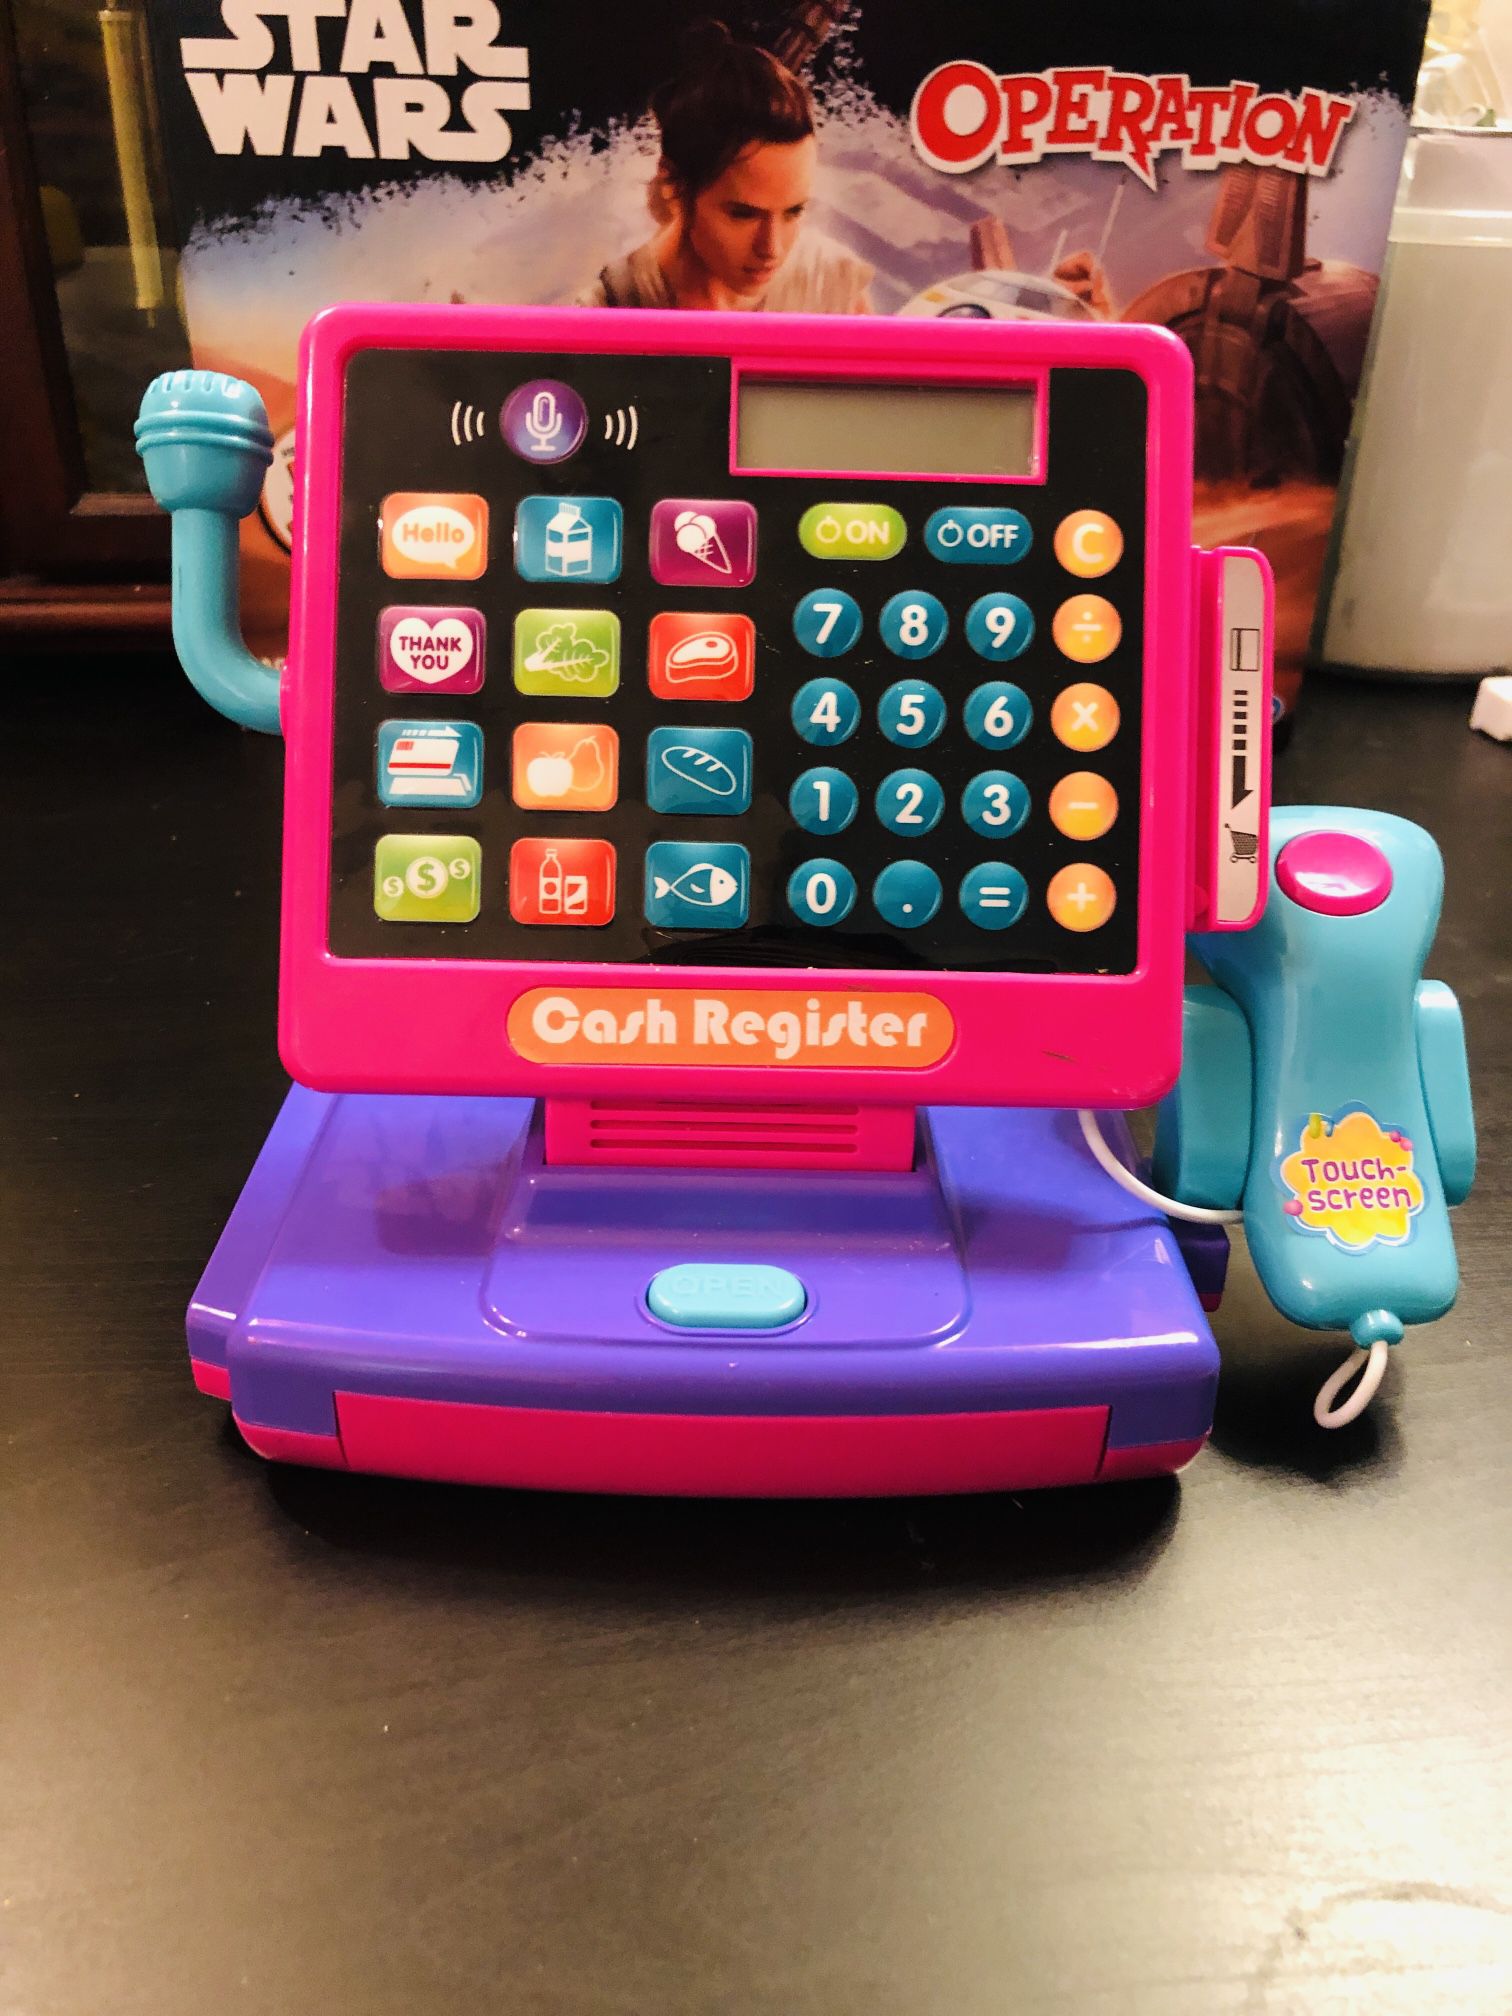 PlayGo Cash Register Toy & Accessories - Touch &Count Supermarket Till Pretend Play Actions & Sounds